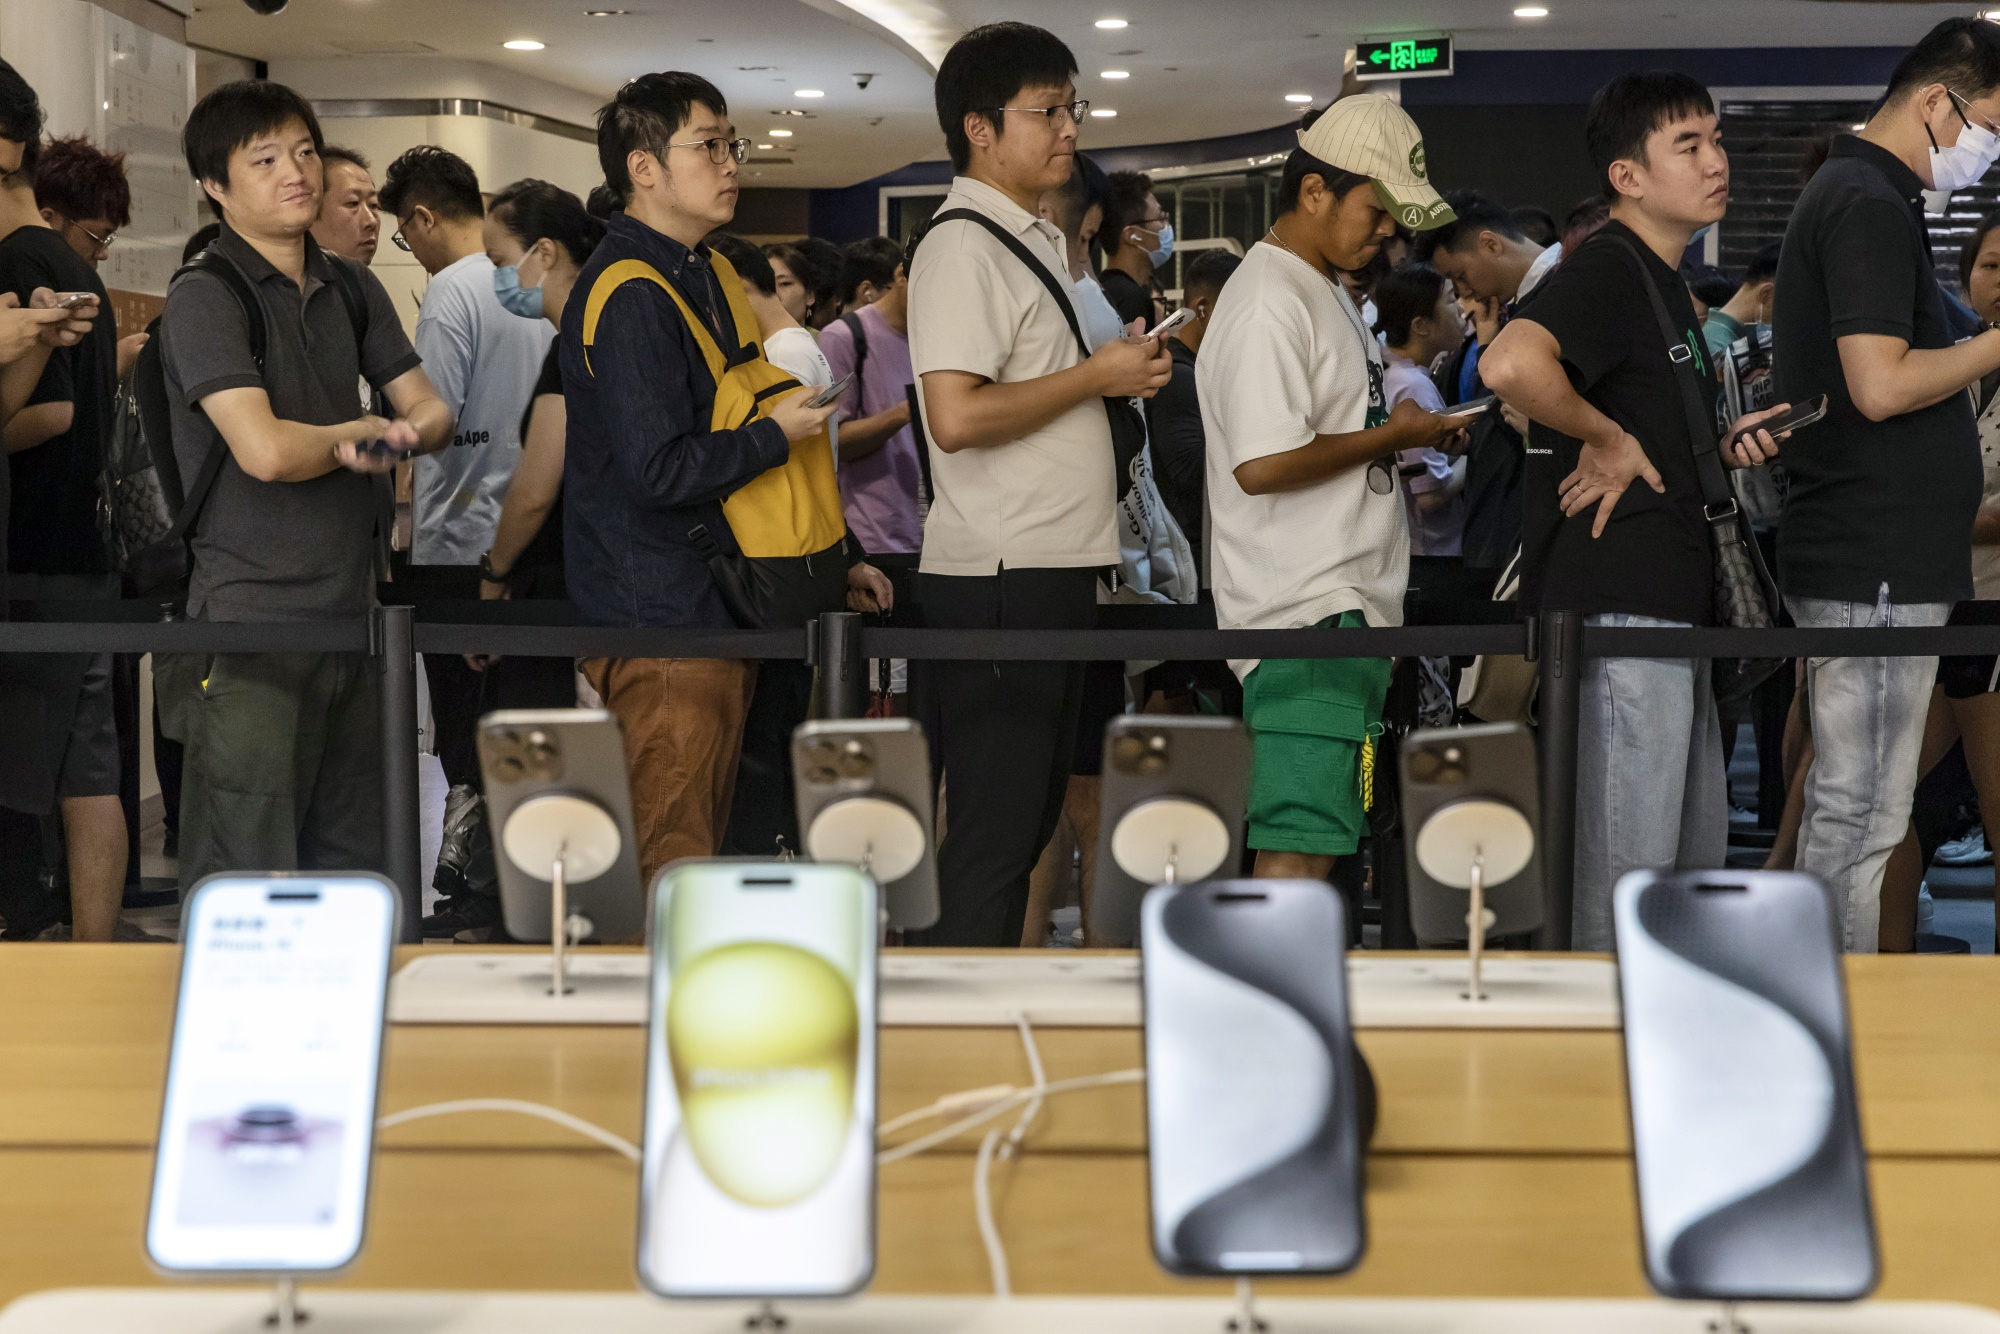 Apple iPhone 15 Pro Titanium Sold Out for Months in China - Bloomberg